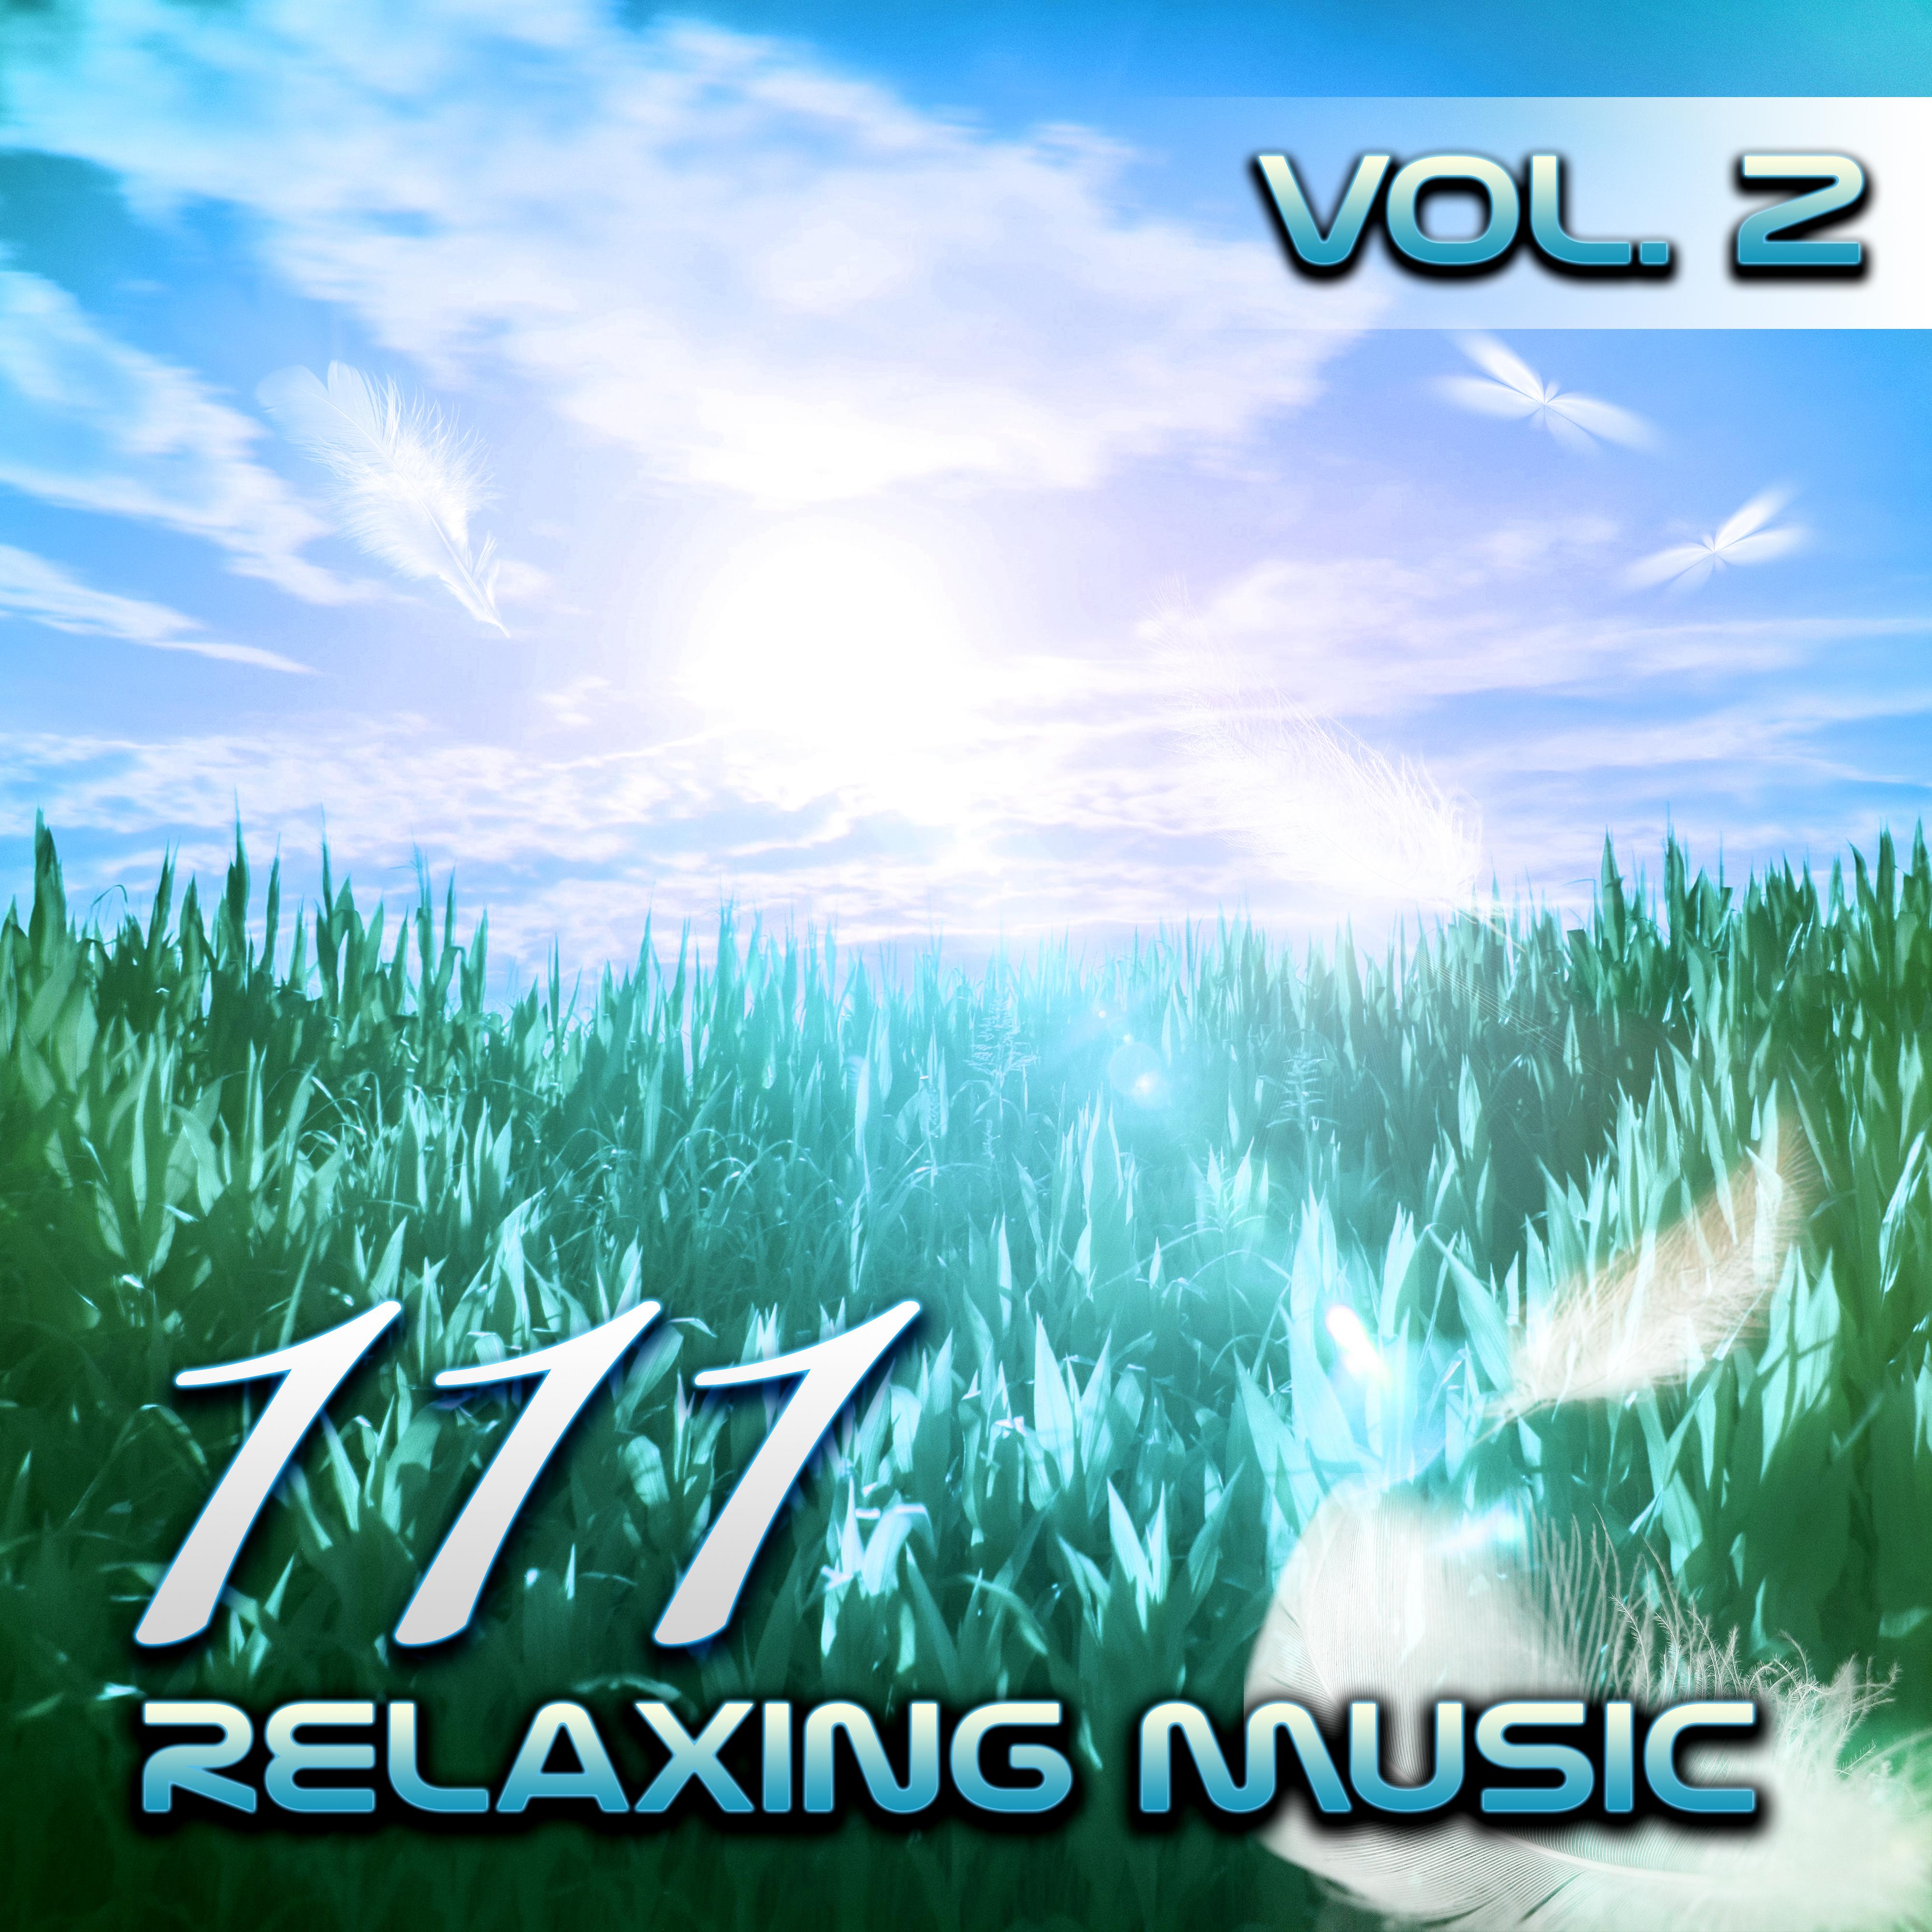 111 Relaxing Tracks Vol. 2  Spa, Massage, Relaxation, Meditation, Reiki, Yoga, Sleep Therapy, Relax Sessions, Natural White Noise